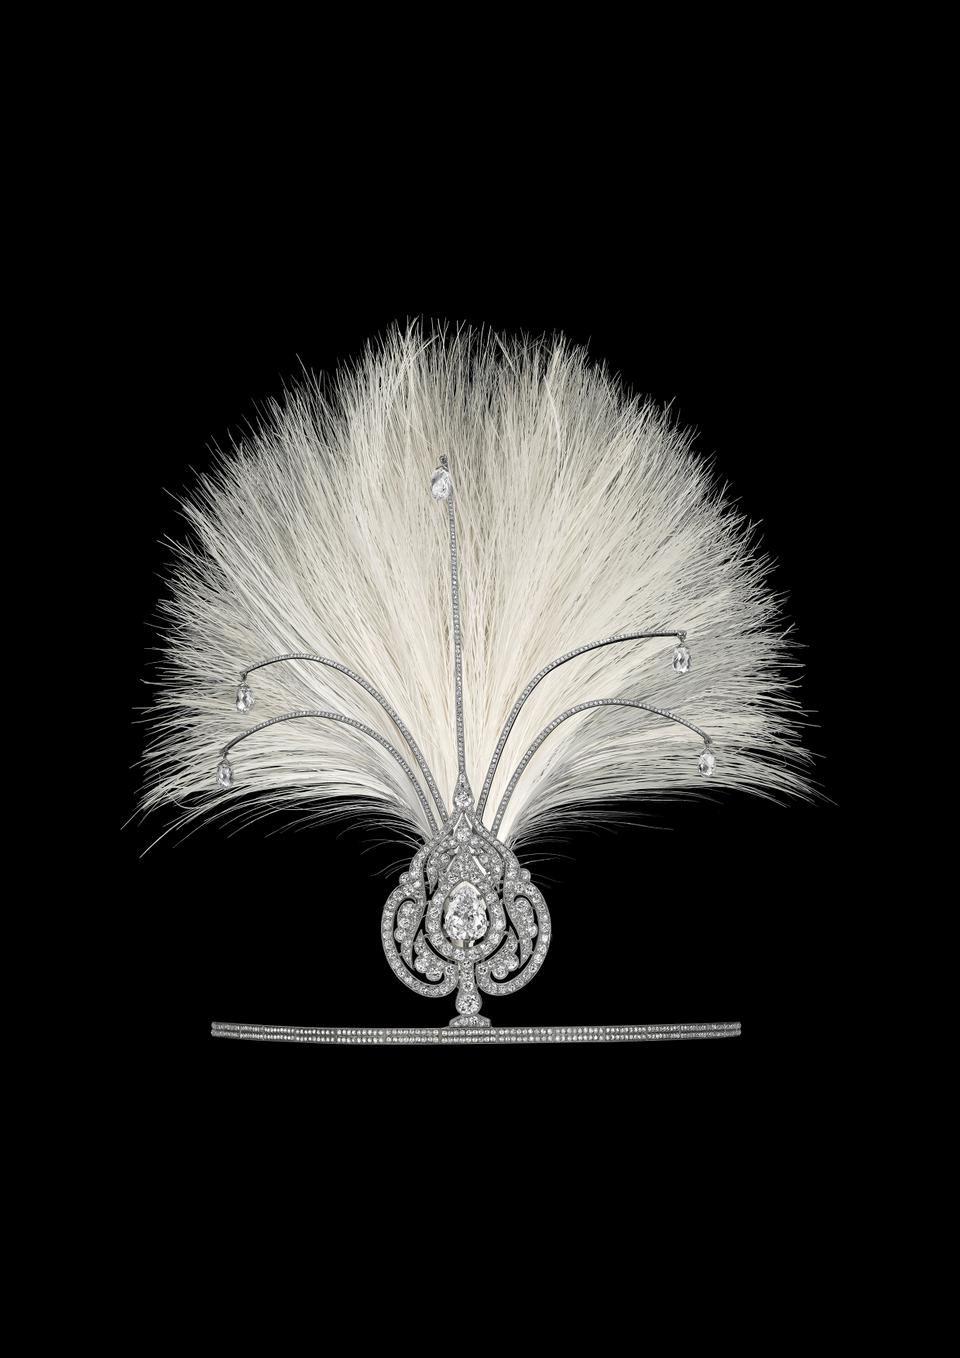 Head ornament, Cartier New York, circa 1924. Platinum, white gold, pink gold, one 4.01-carat pear-shaped diamond, five briolette-cut diamonds weighing 5.22 carats in total, round old-, single- and rose-cut diamonds, feathers, millegrain setting. Cartier Collection.